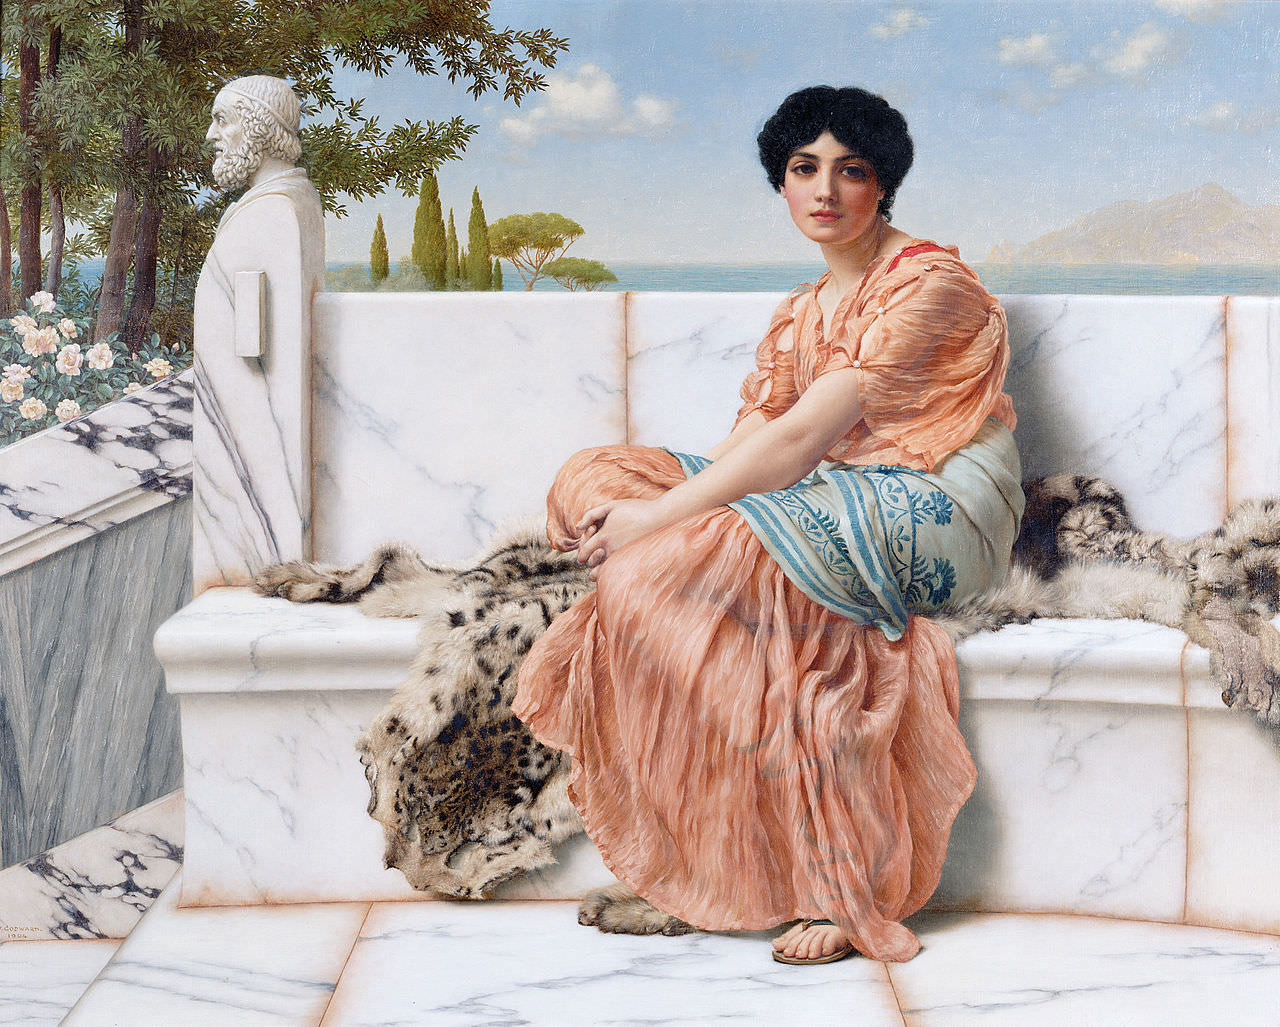 The Marble Maiden: A Digital Tribute to Classic Greek Beauty